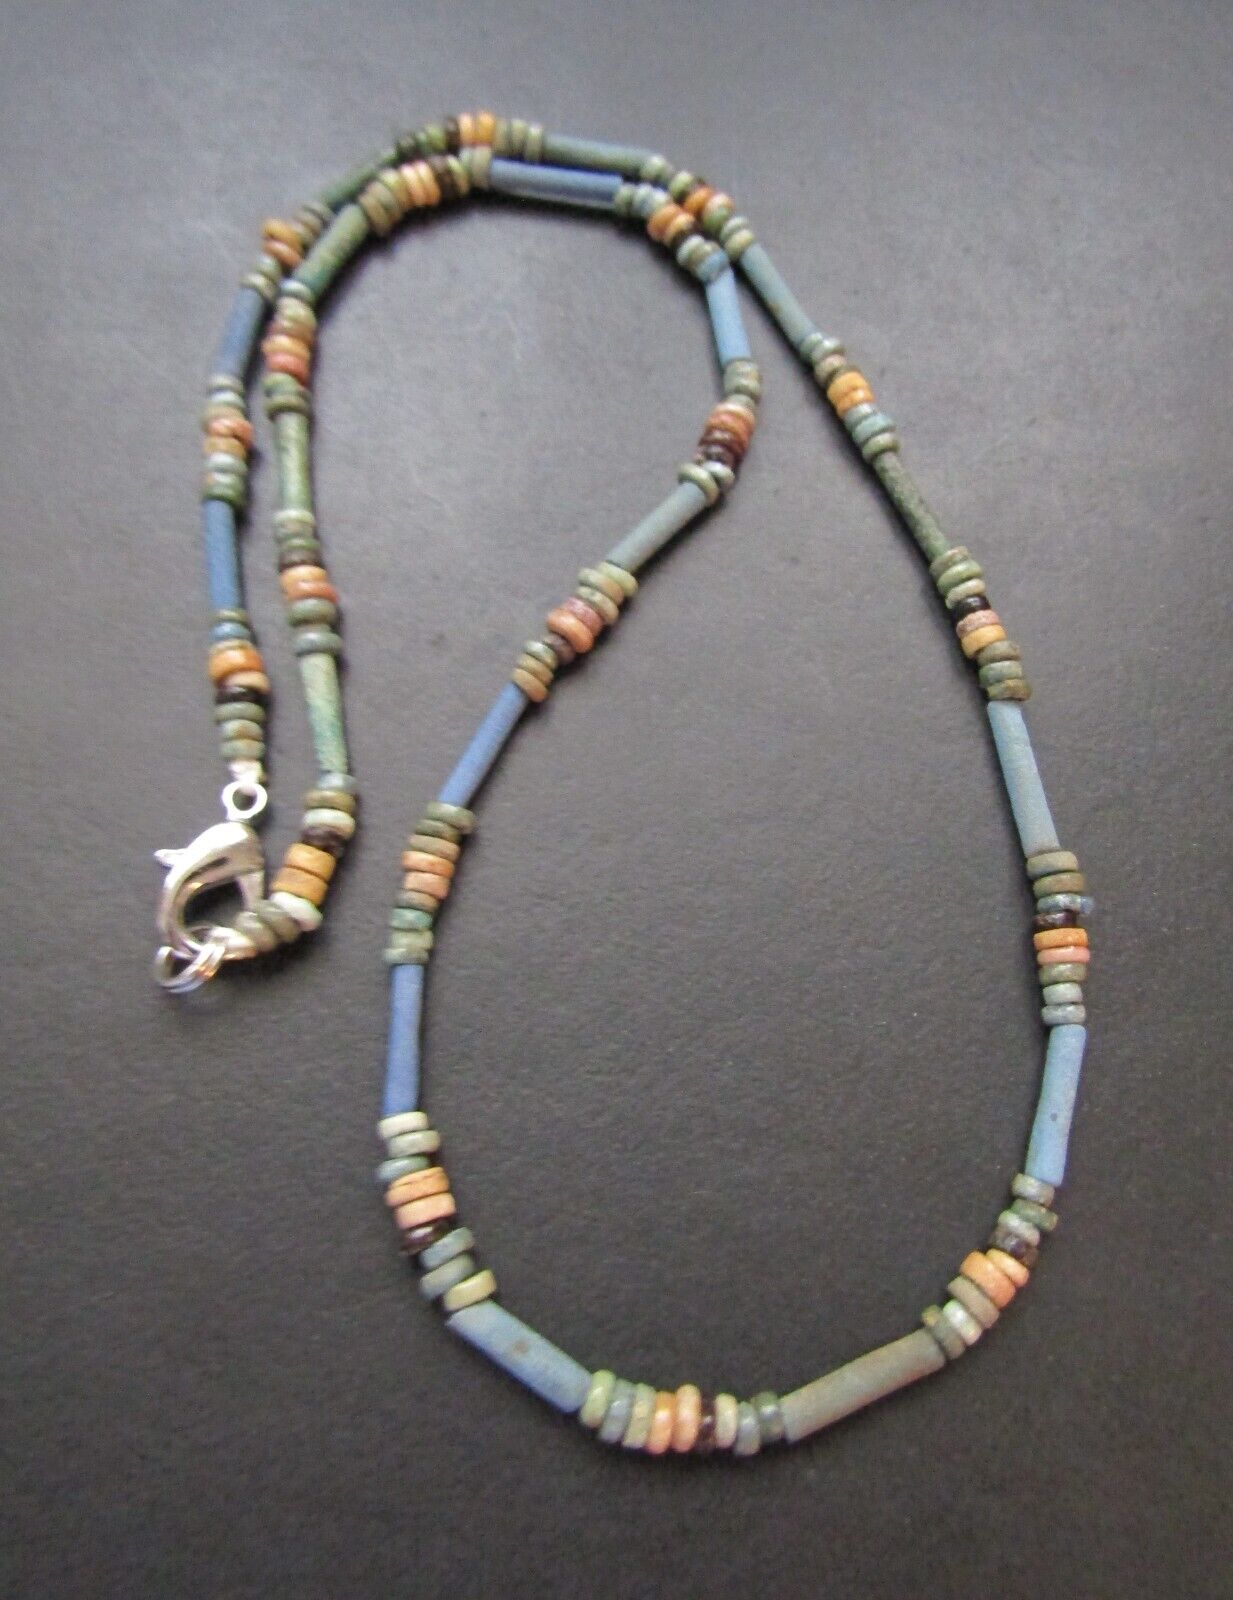 NILE  Ancient Egyptian Faience Amulet Mummy Bead Necklace ca 600 BC